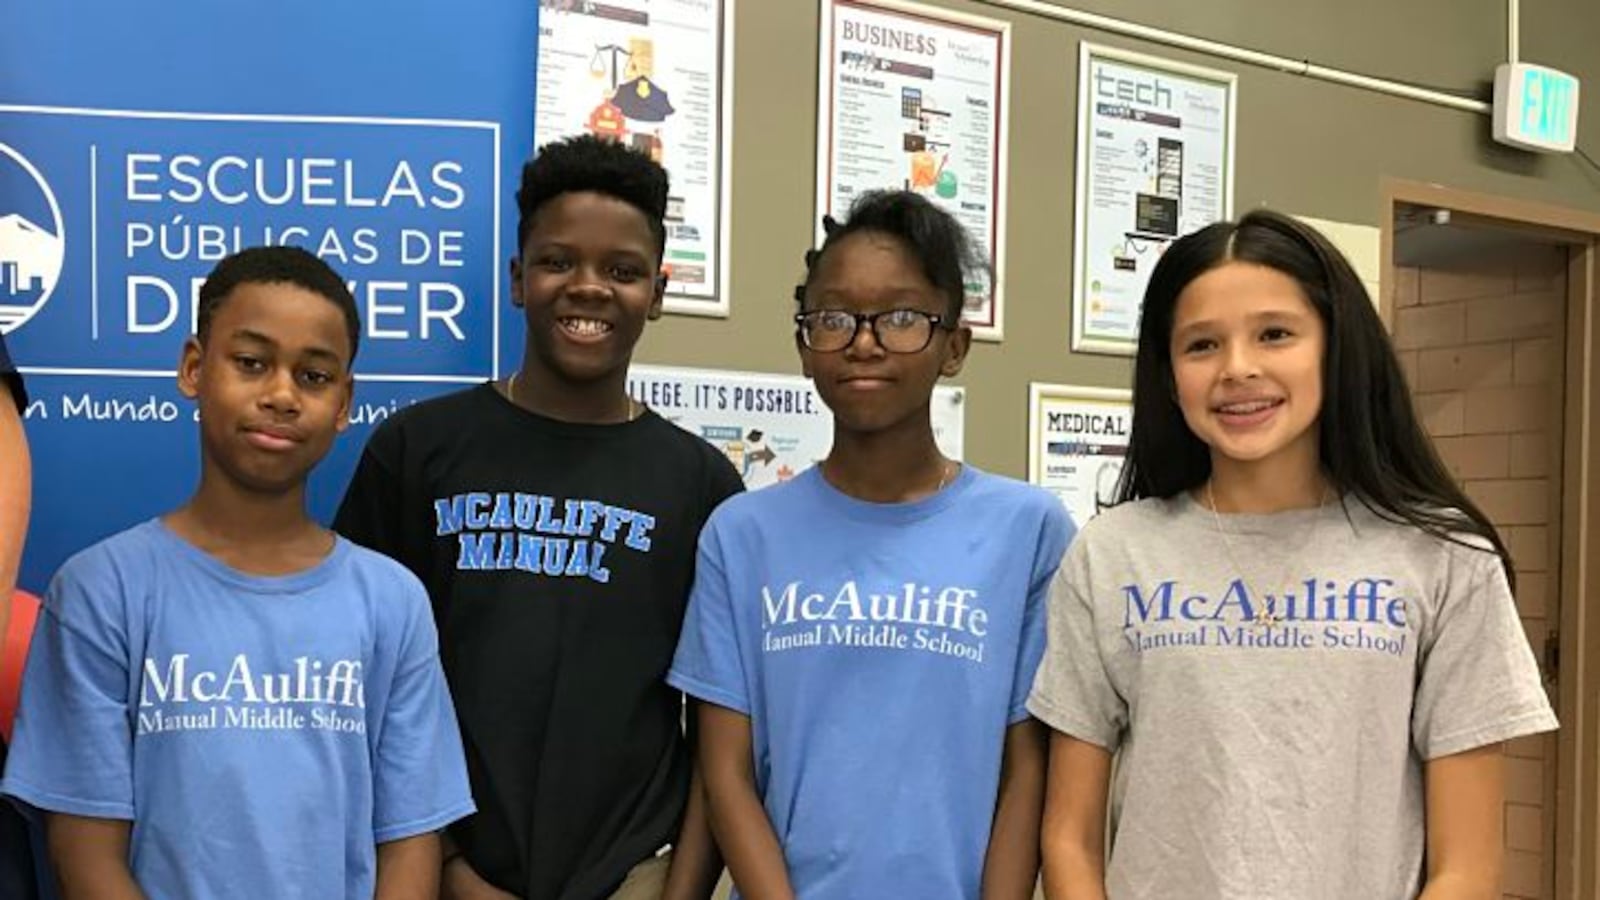 McAuliffe Manual Middle School students at a press conference about test scores in August 2017. The school has signaled its intent to be part of a new innovation zone.